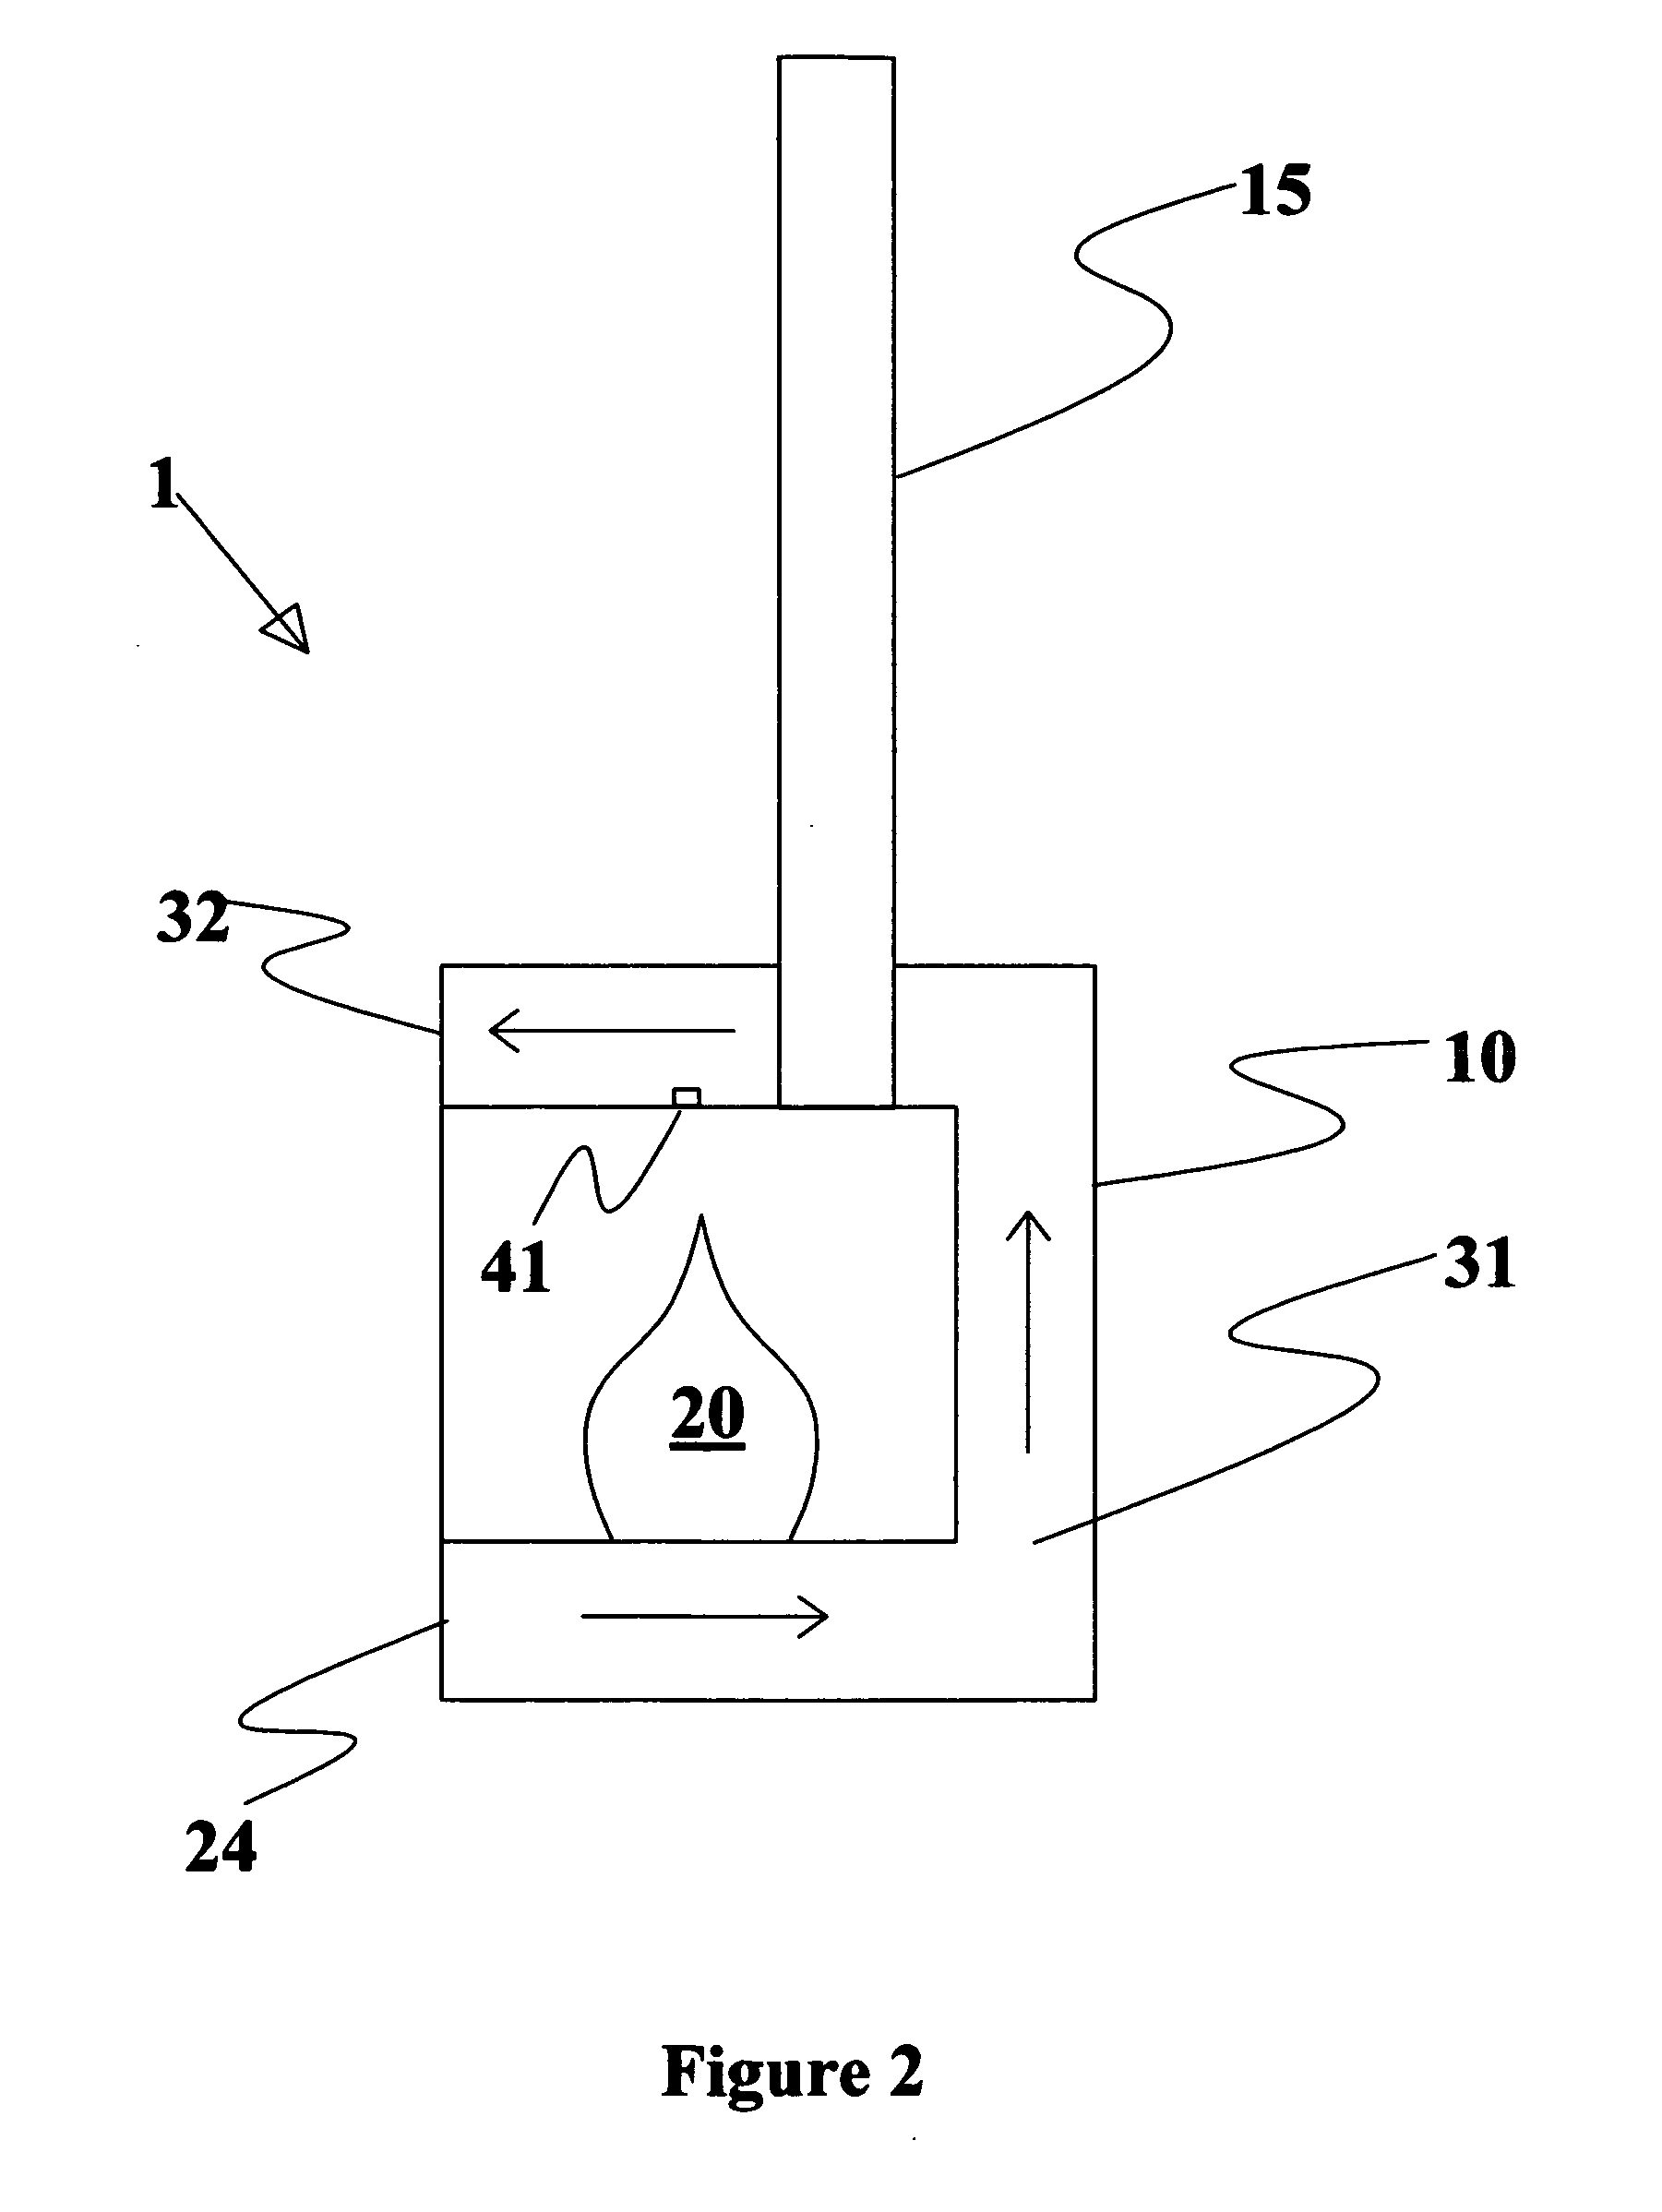 Intelligent and adaptive control system and method for wood burning stove